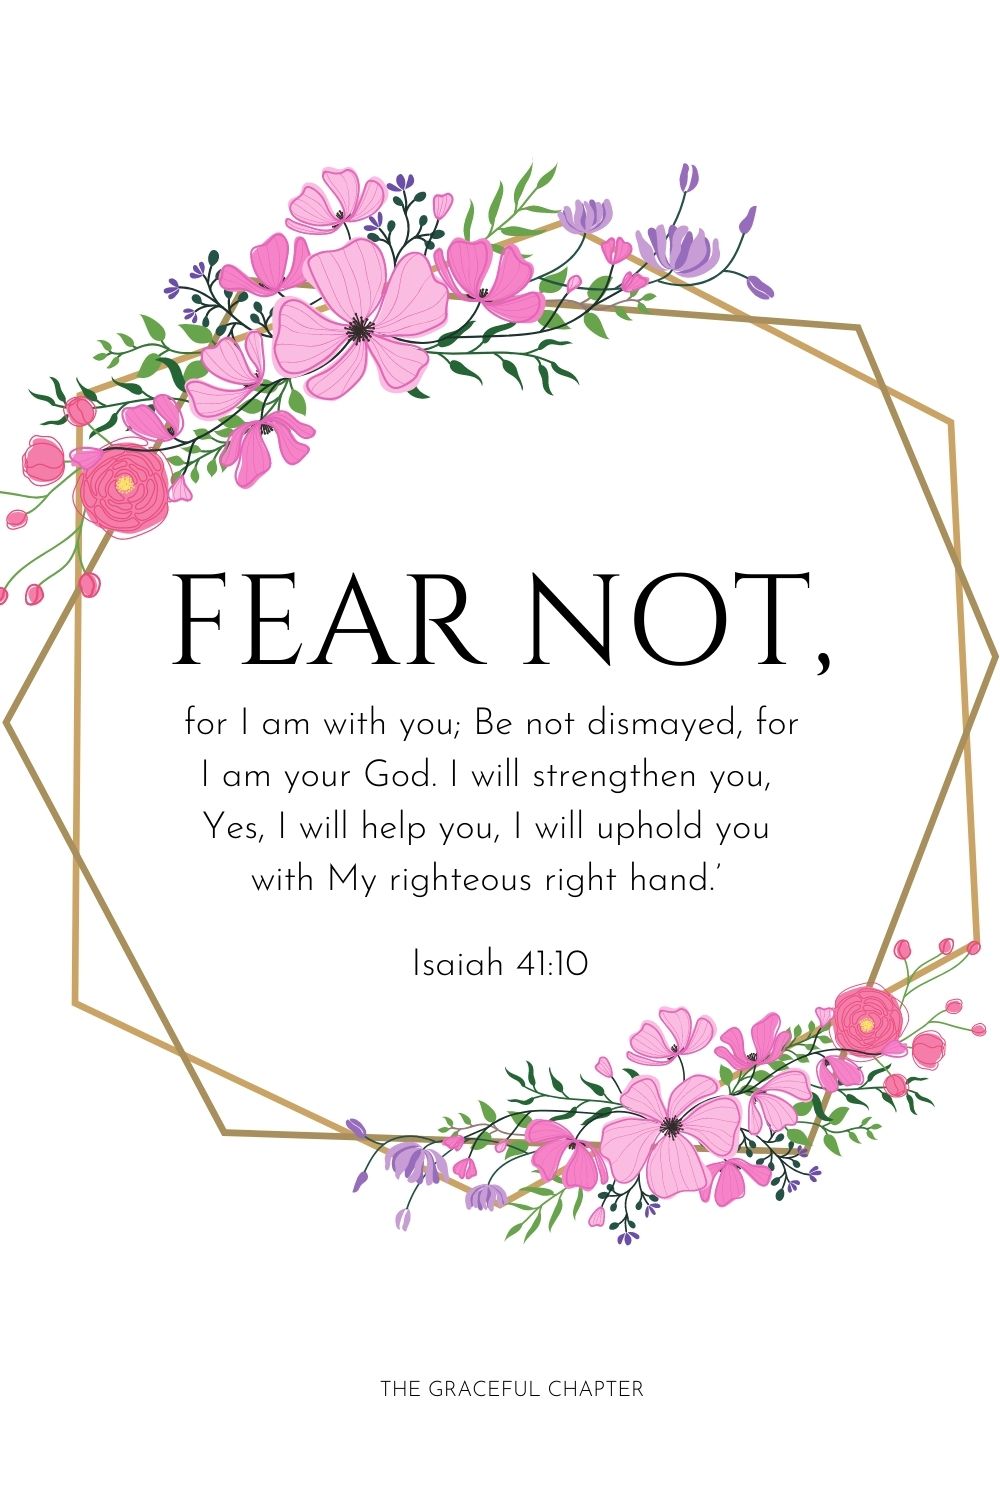 Fear not, for I am with you;
Be not dismayed, for I am your God.
I will strengthen you,
Yes, I will help you,
I will uphold you with My righteous right hand.’ Isaiah 41:10